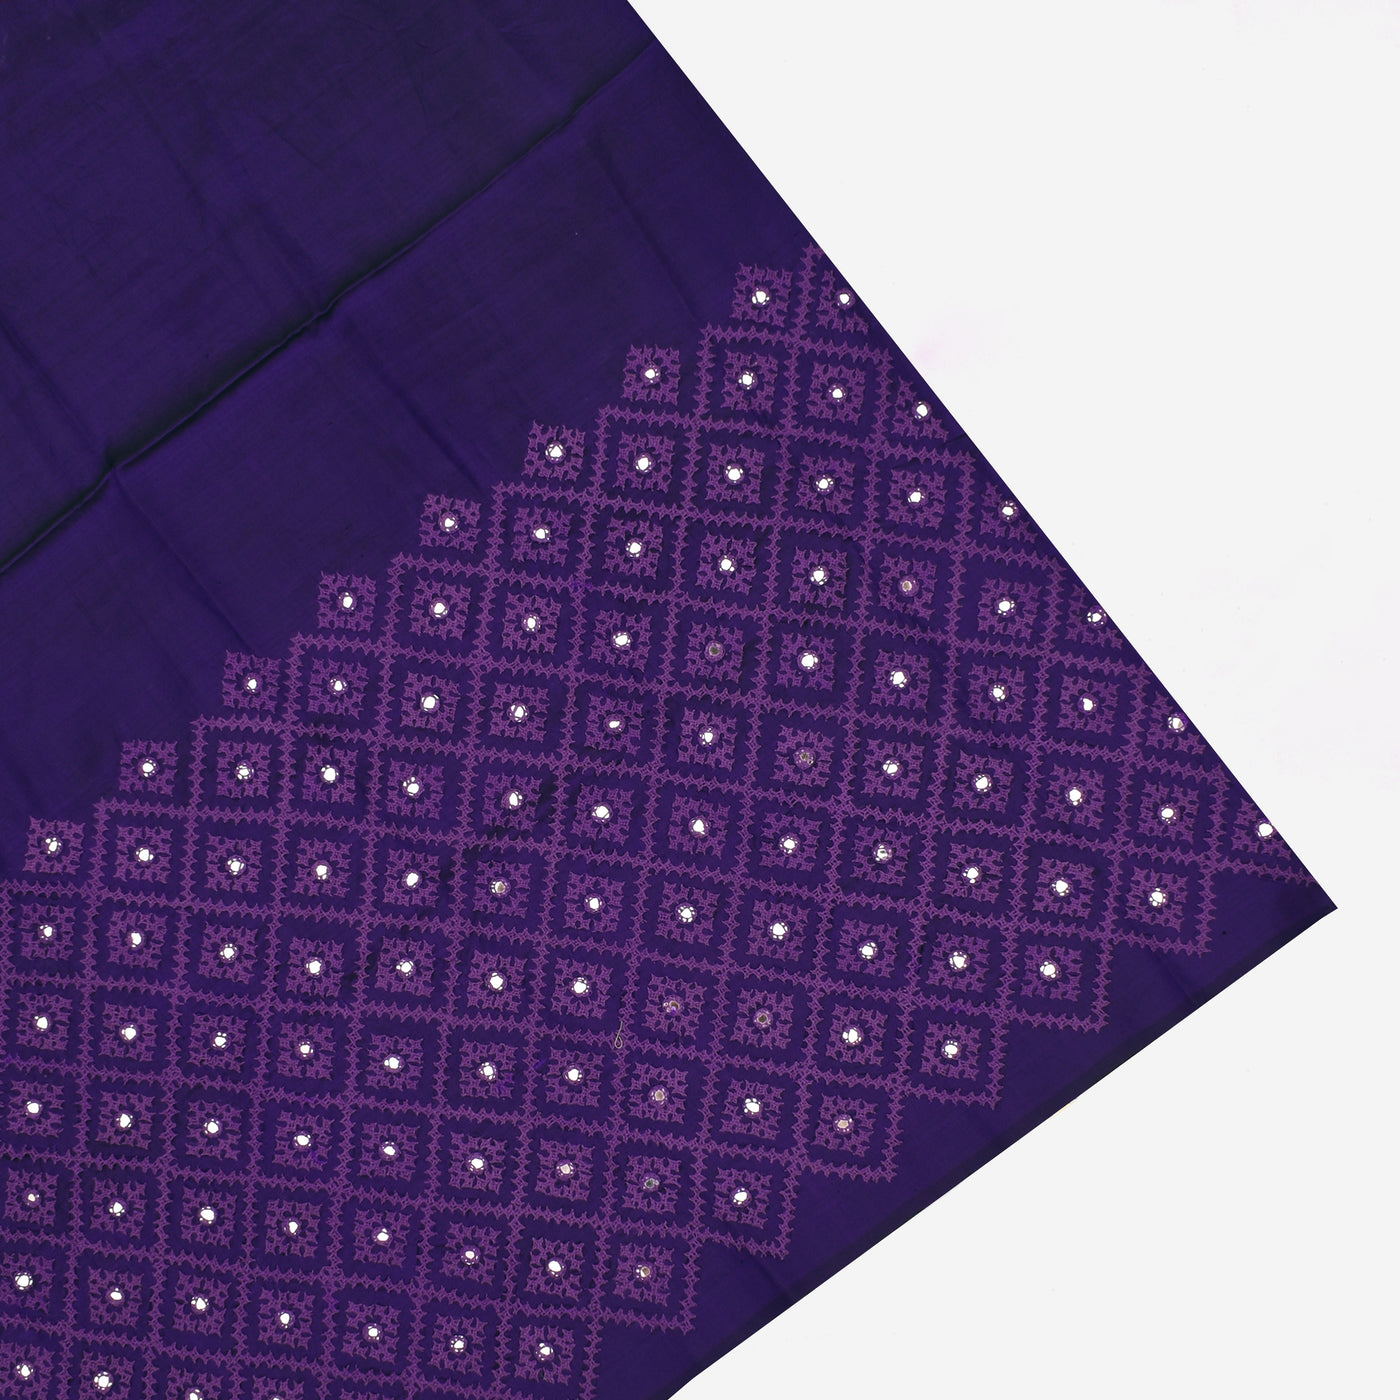 Lilac Kanchi Silk Saree with Kanchi Silk Tassels and Violet Kutch work Embroidery Blouse